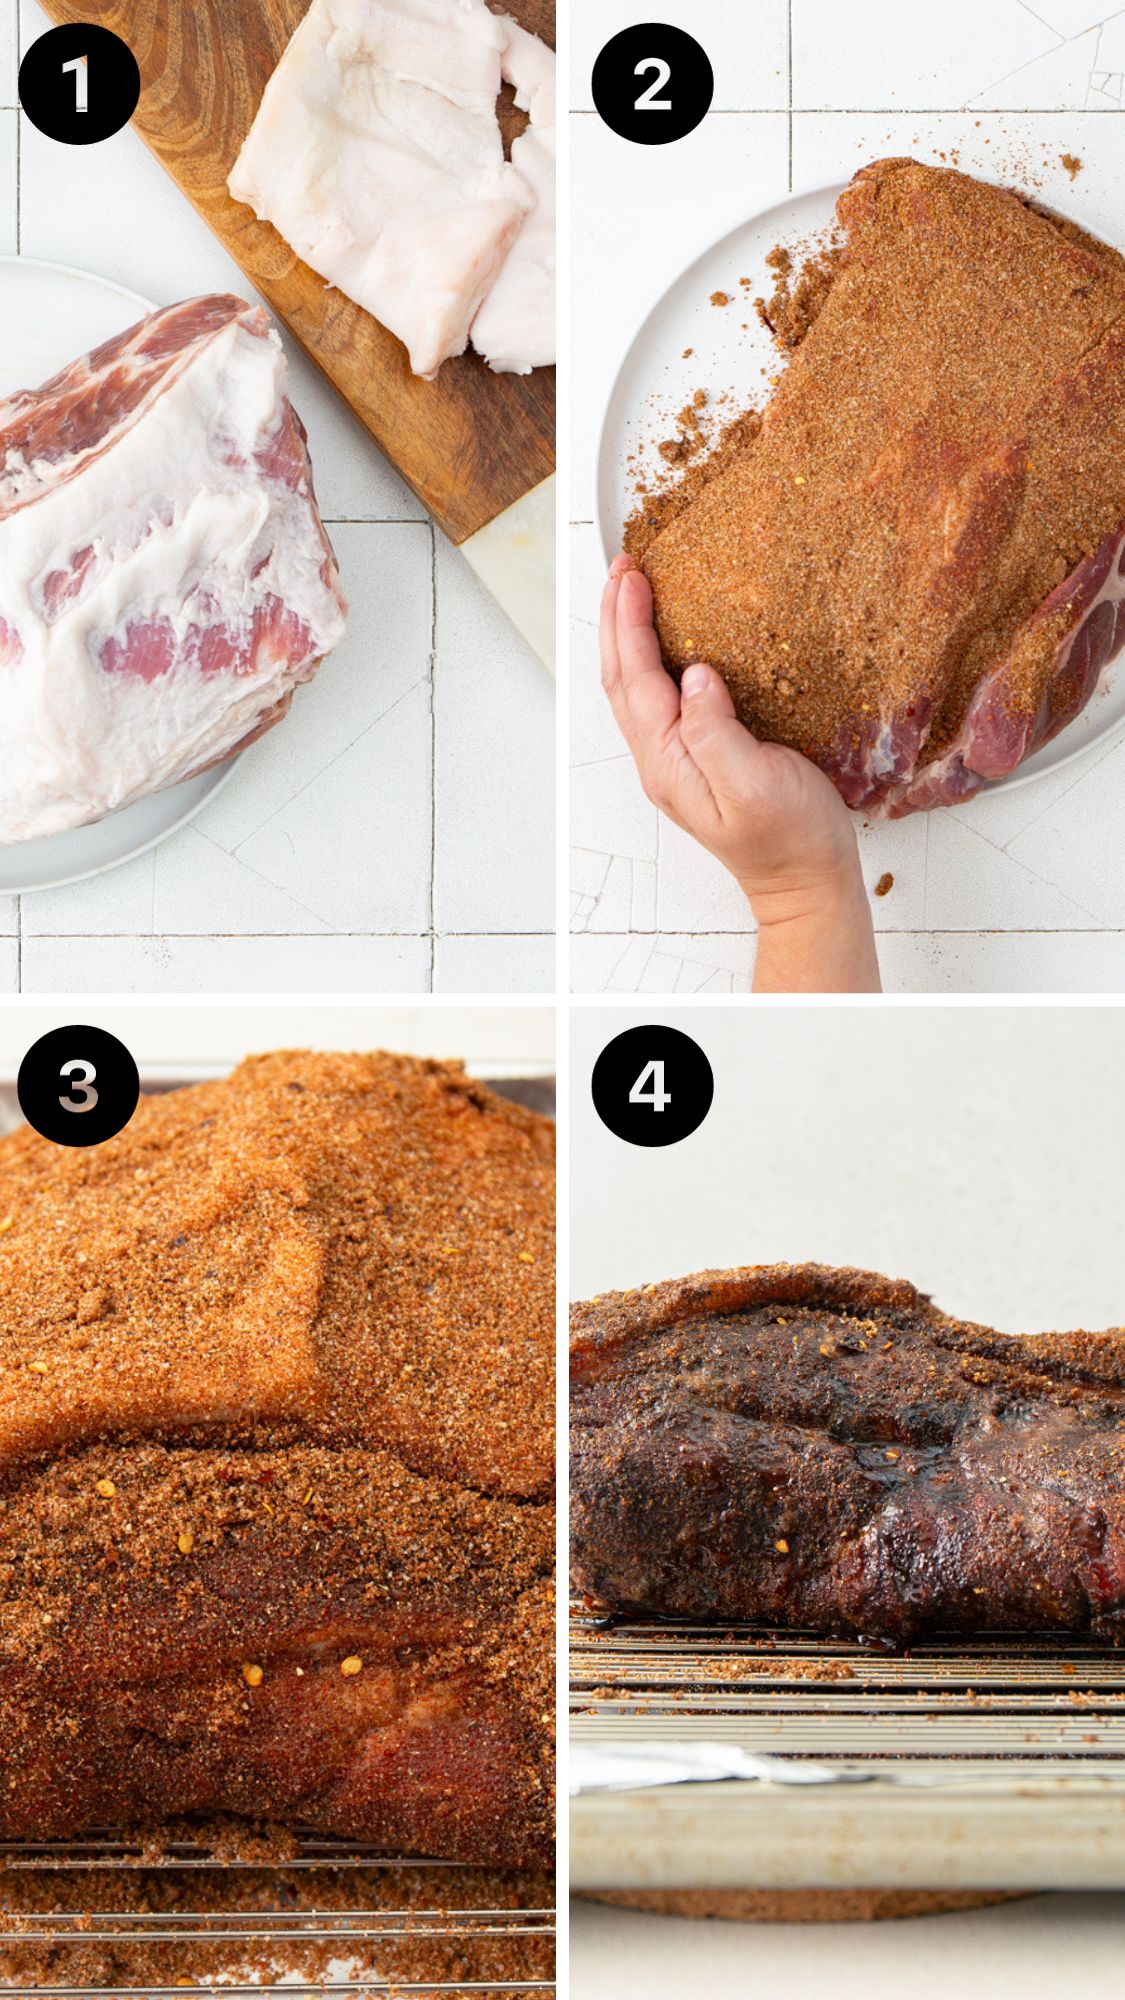 how to make pulled pork in the oven step by step process